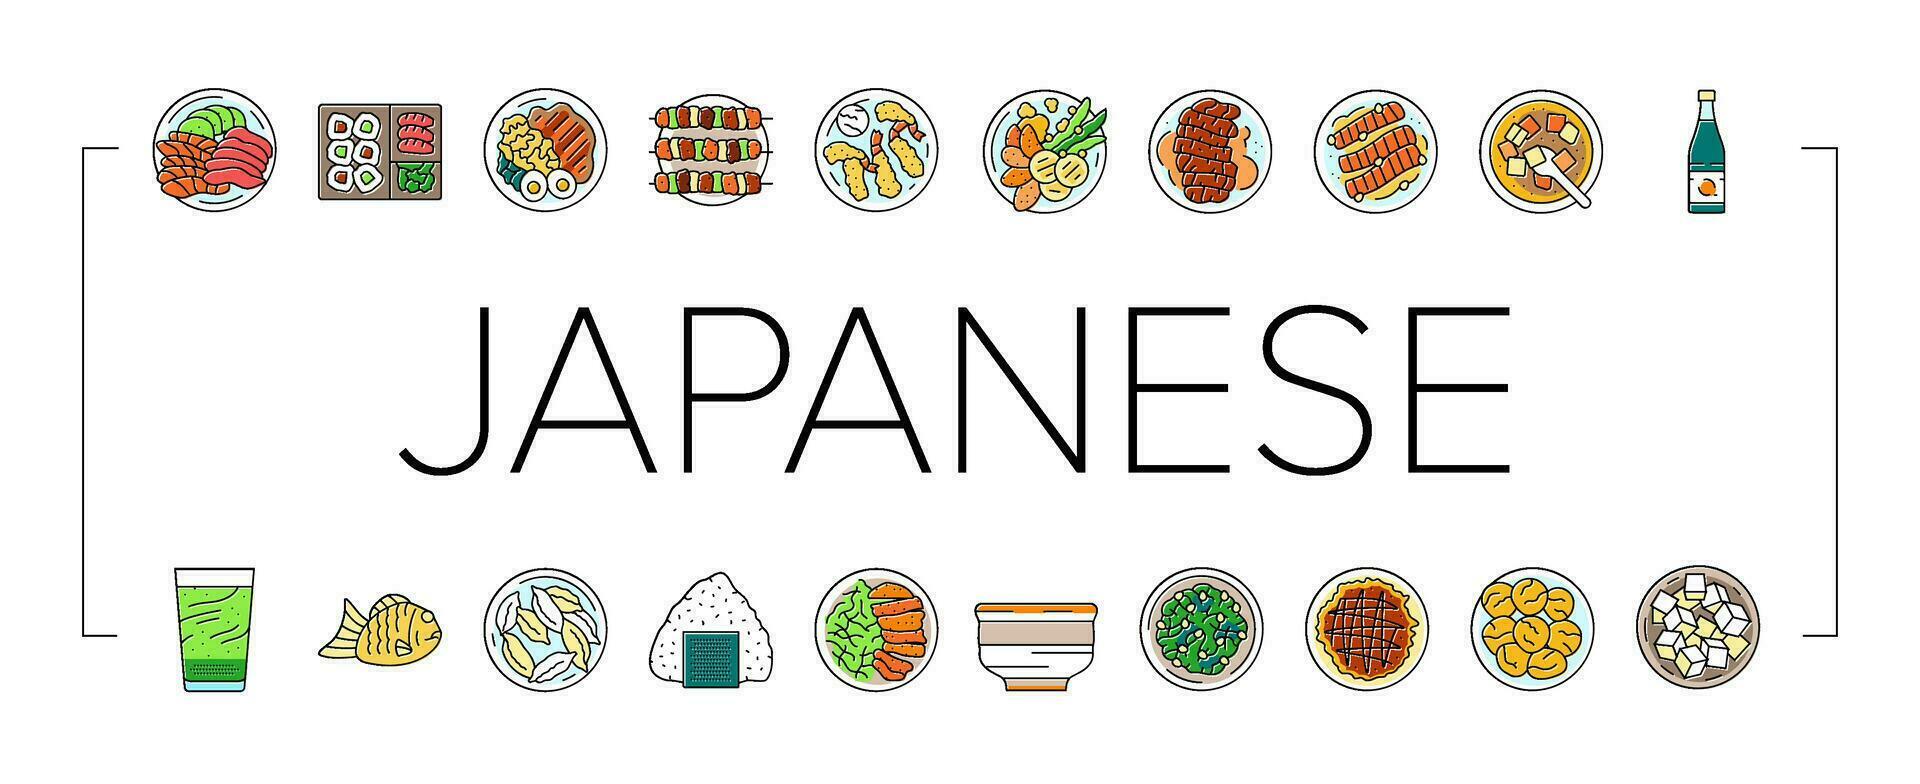 japanese food asian meal icons set vector